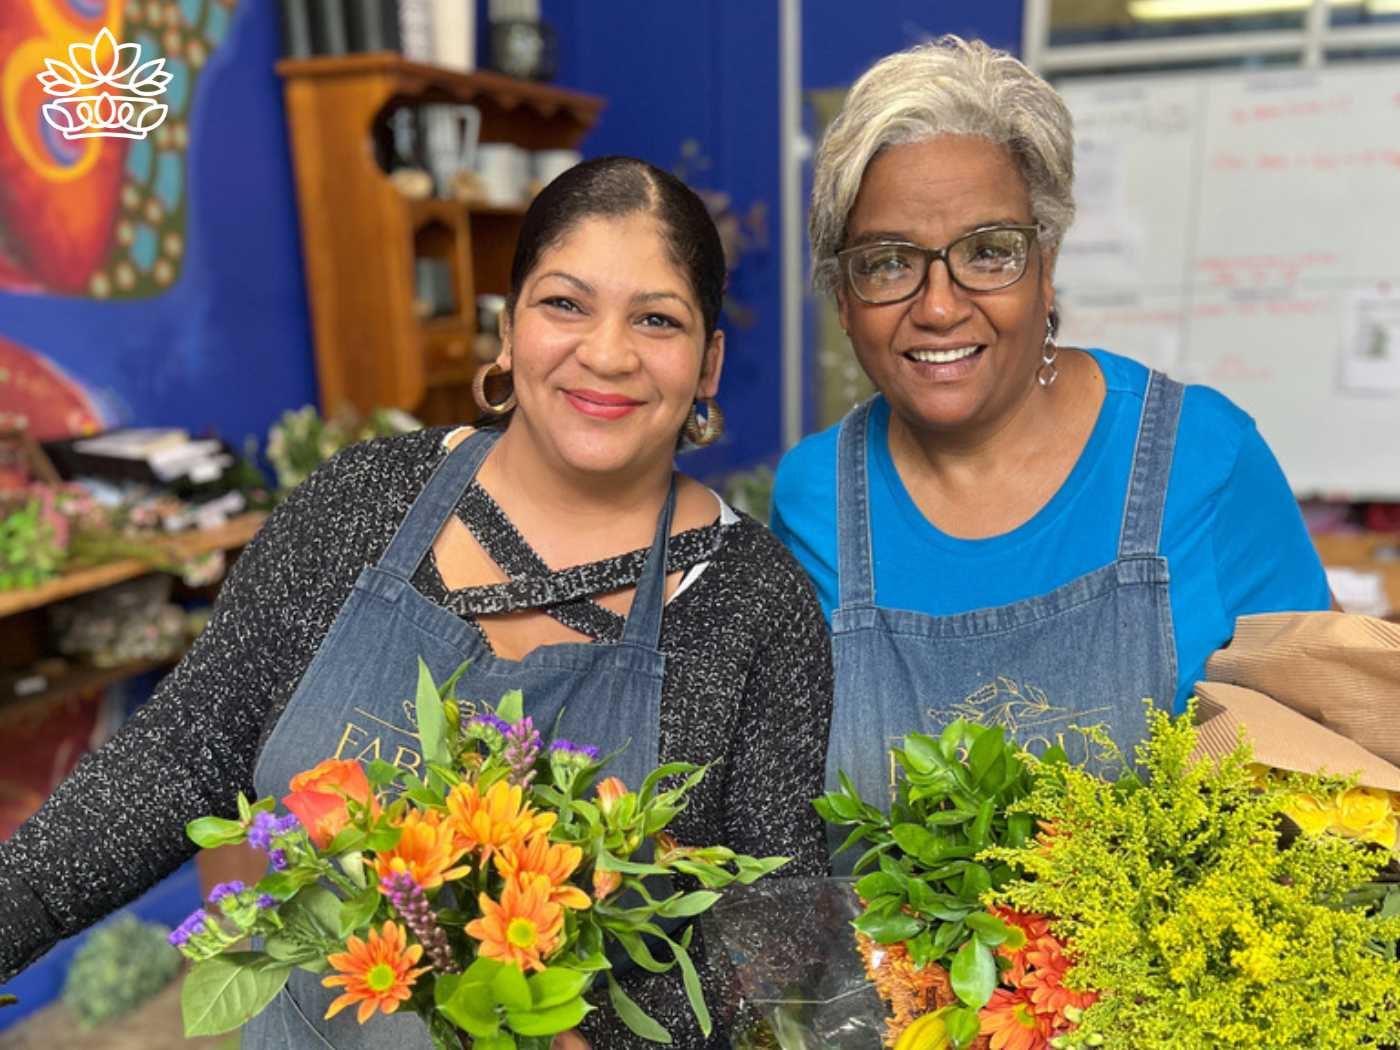 Two smiling florists holding vibrant arrangements from the Flowers By Type Collection at Fabulous Flowers and Gifts store, featuring annuals, seeds, and a diverse range of flowers.